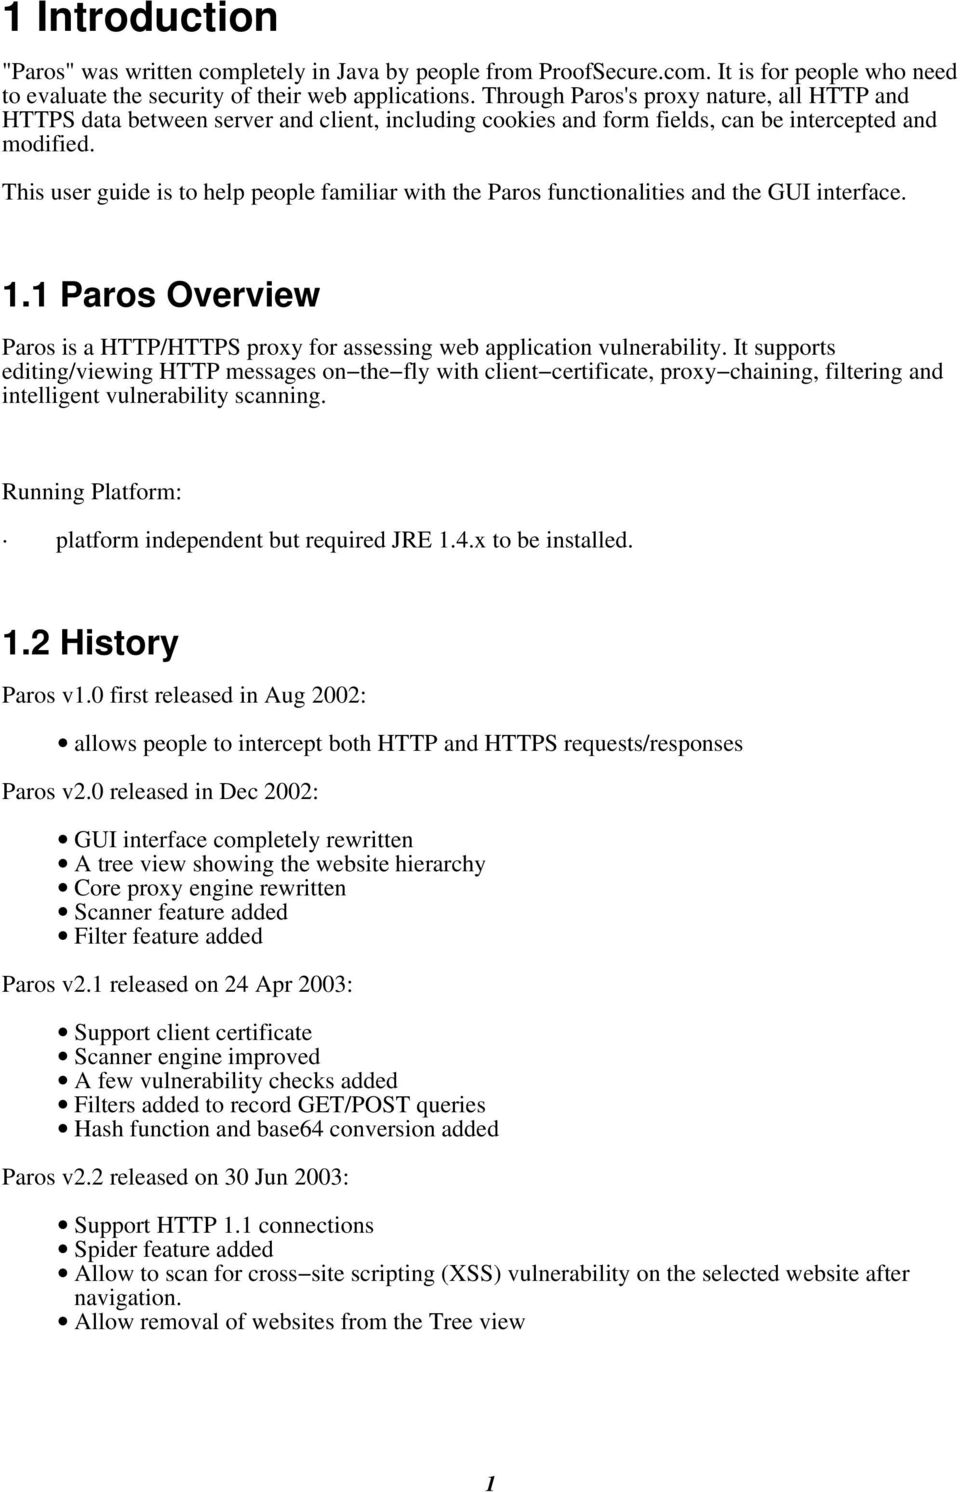 This user guide is to help people familiar with the Paros functionalities and the GUI interface. 1.1 Paros Overview Paros is a HTTP/HTTPS proxy for assessing web application vulnerability.